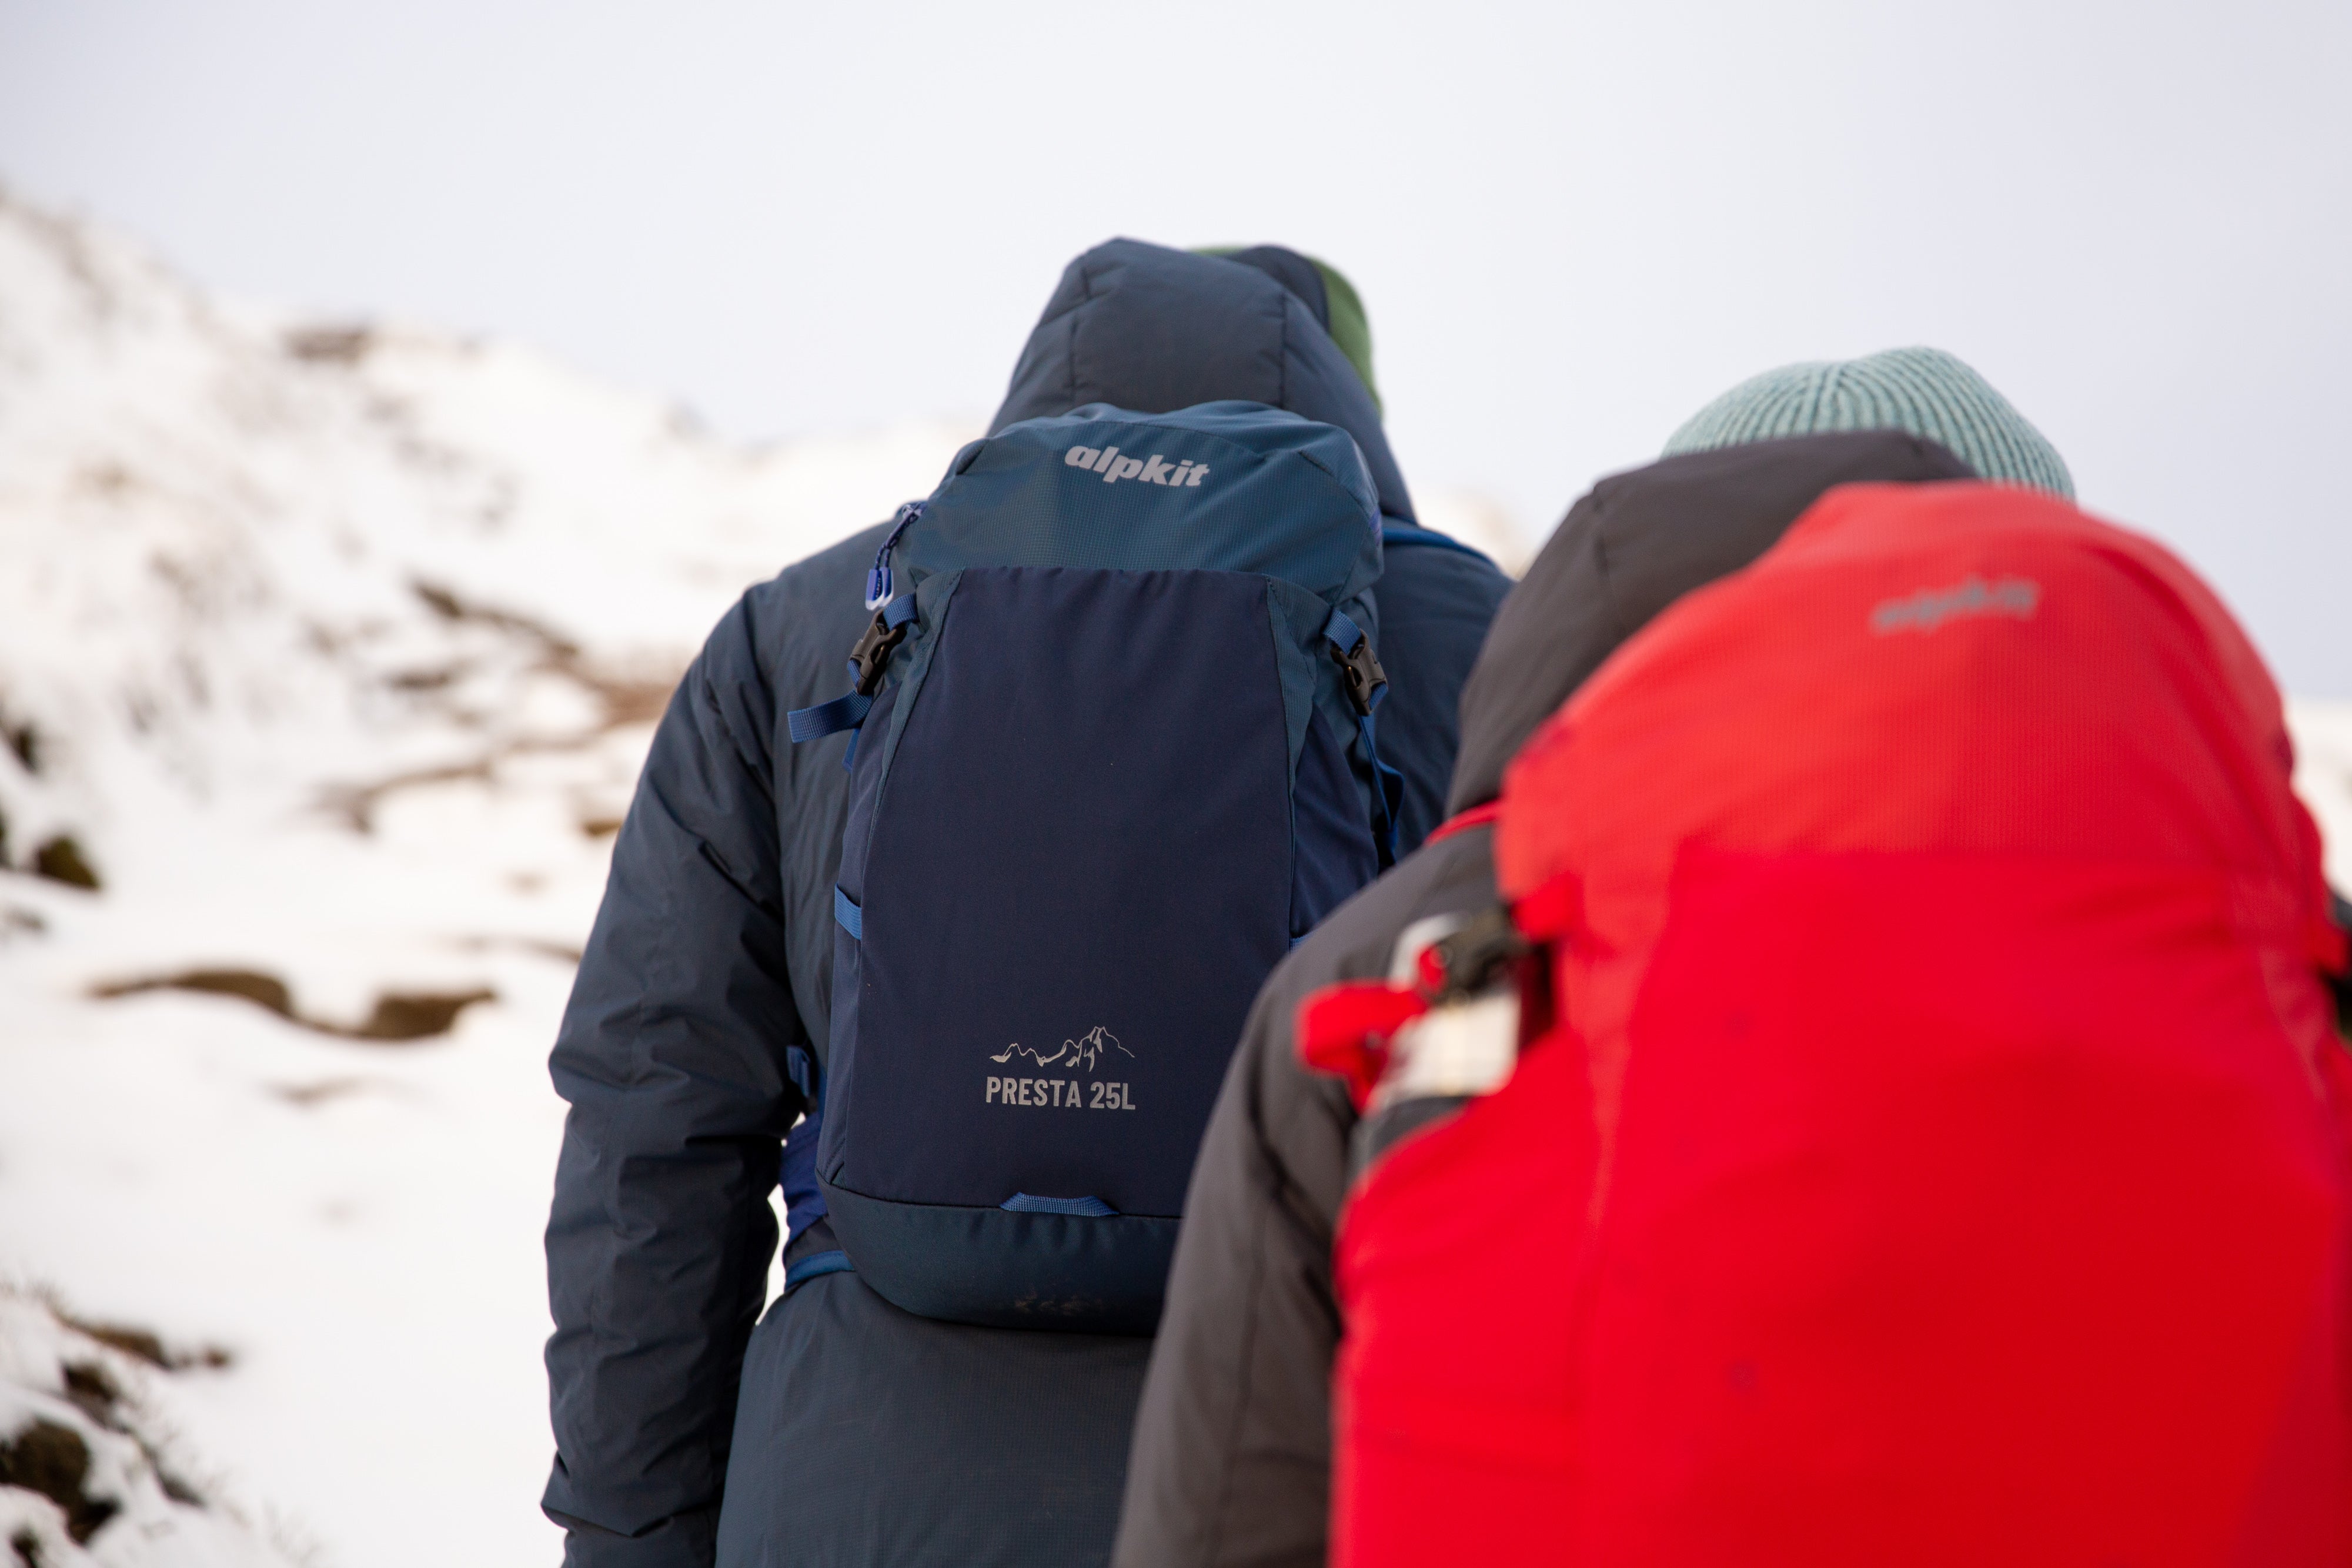 Two people walking with Presta 25 rucksacks across the Kinder Plateau in the snow